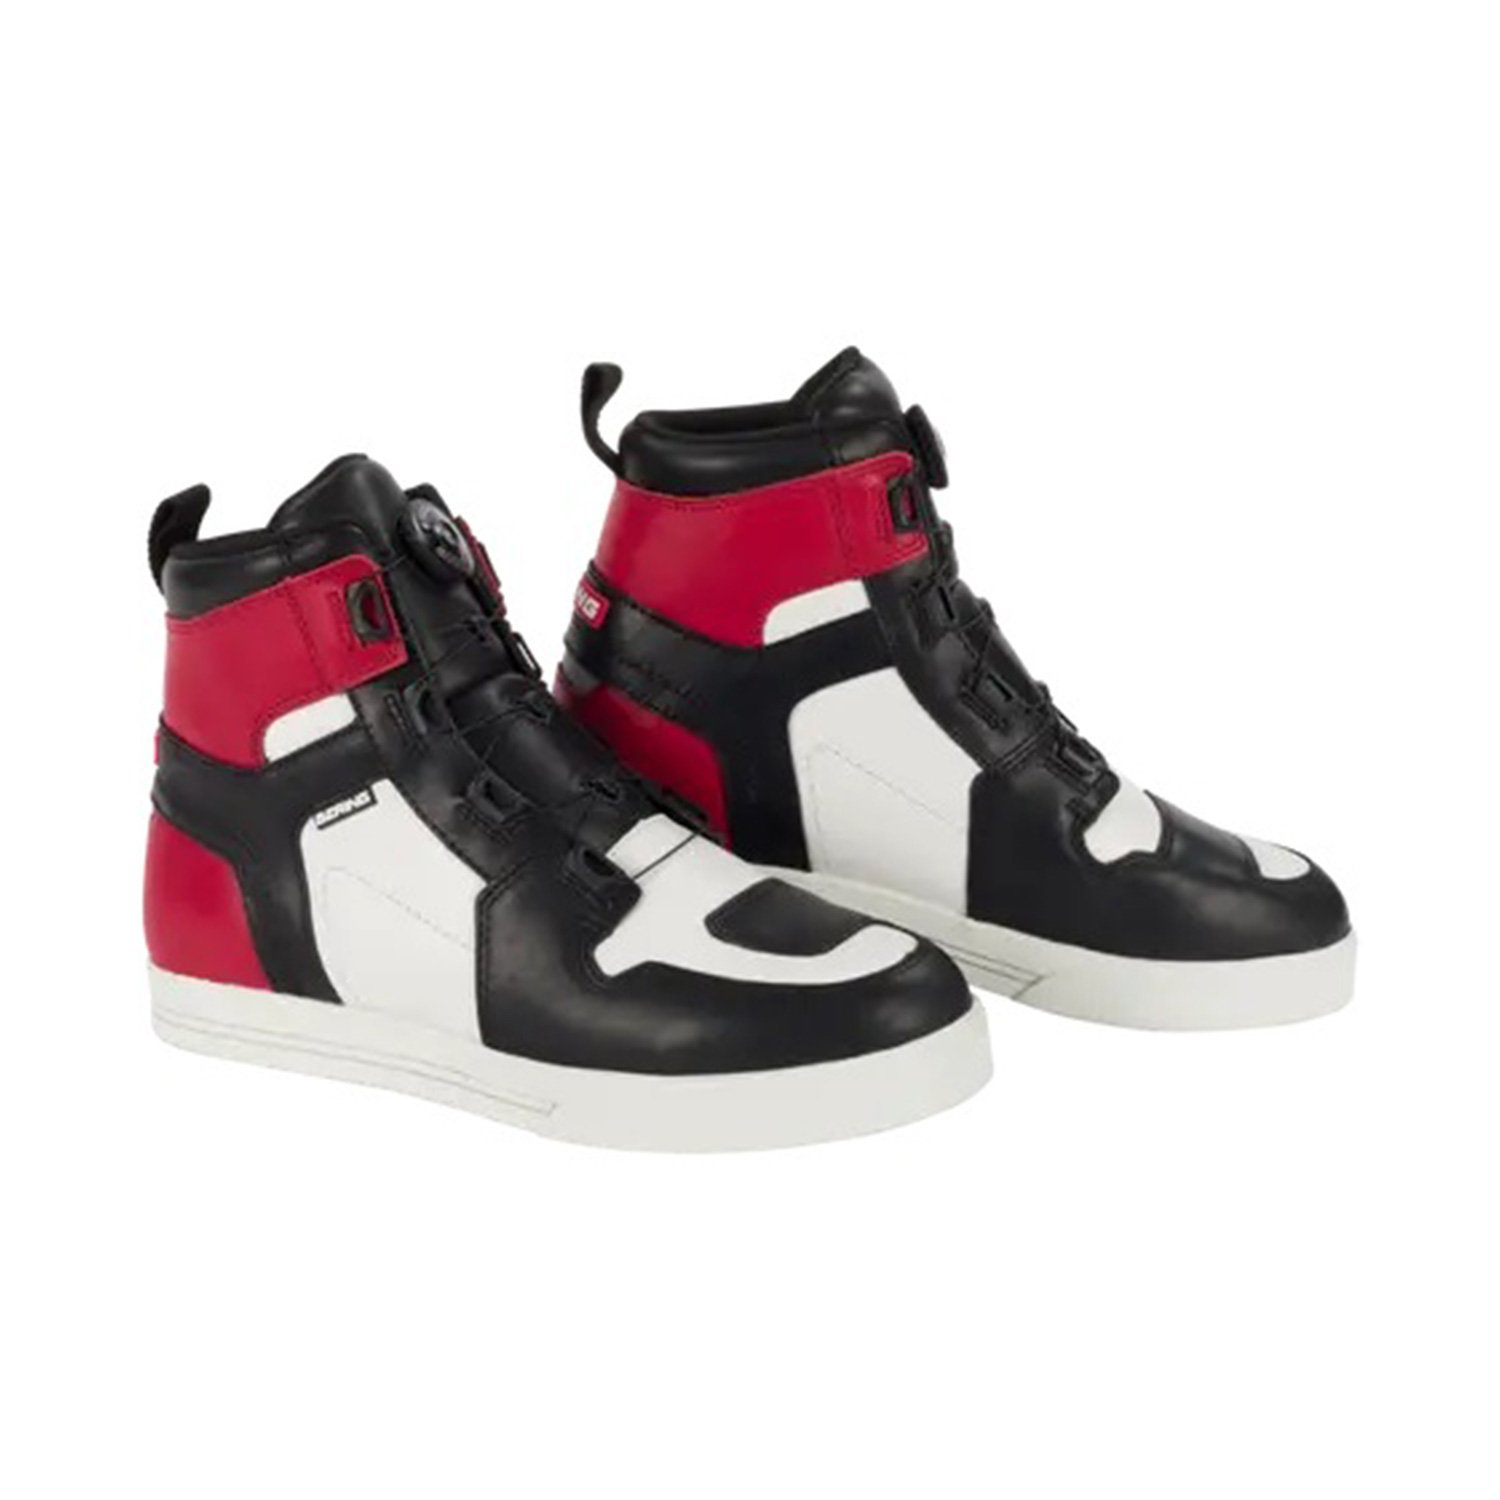 Image of Bering Sneakers Reflex A-Top Black White Red Size 46 EN